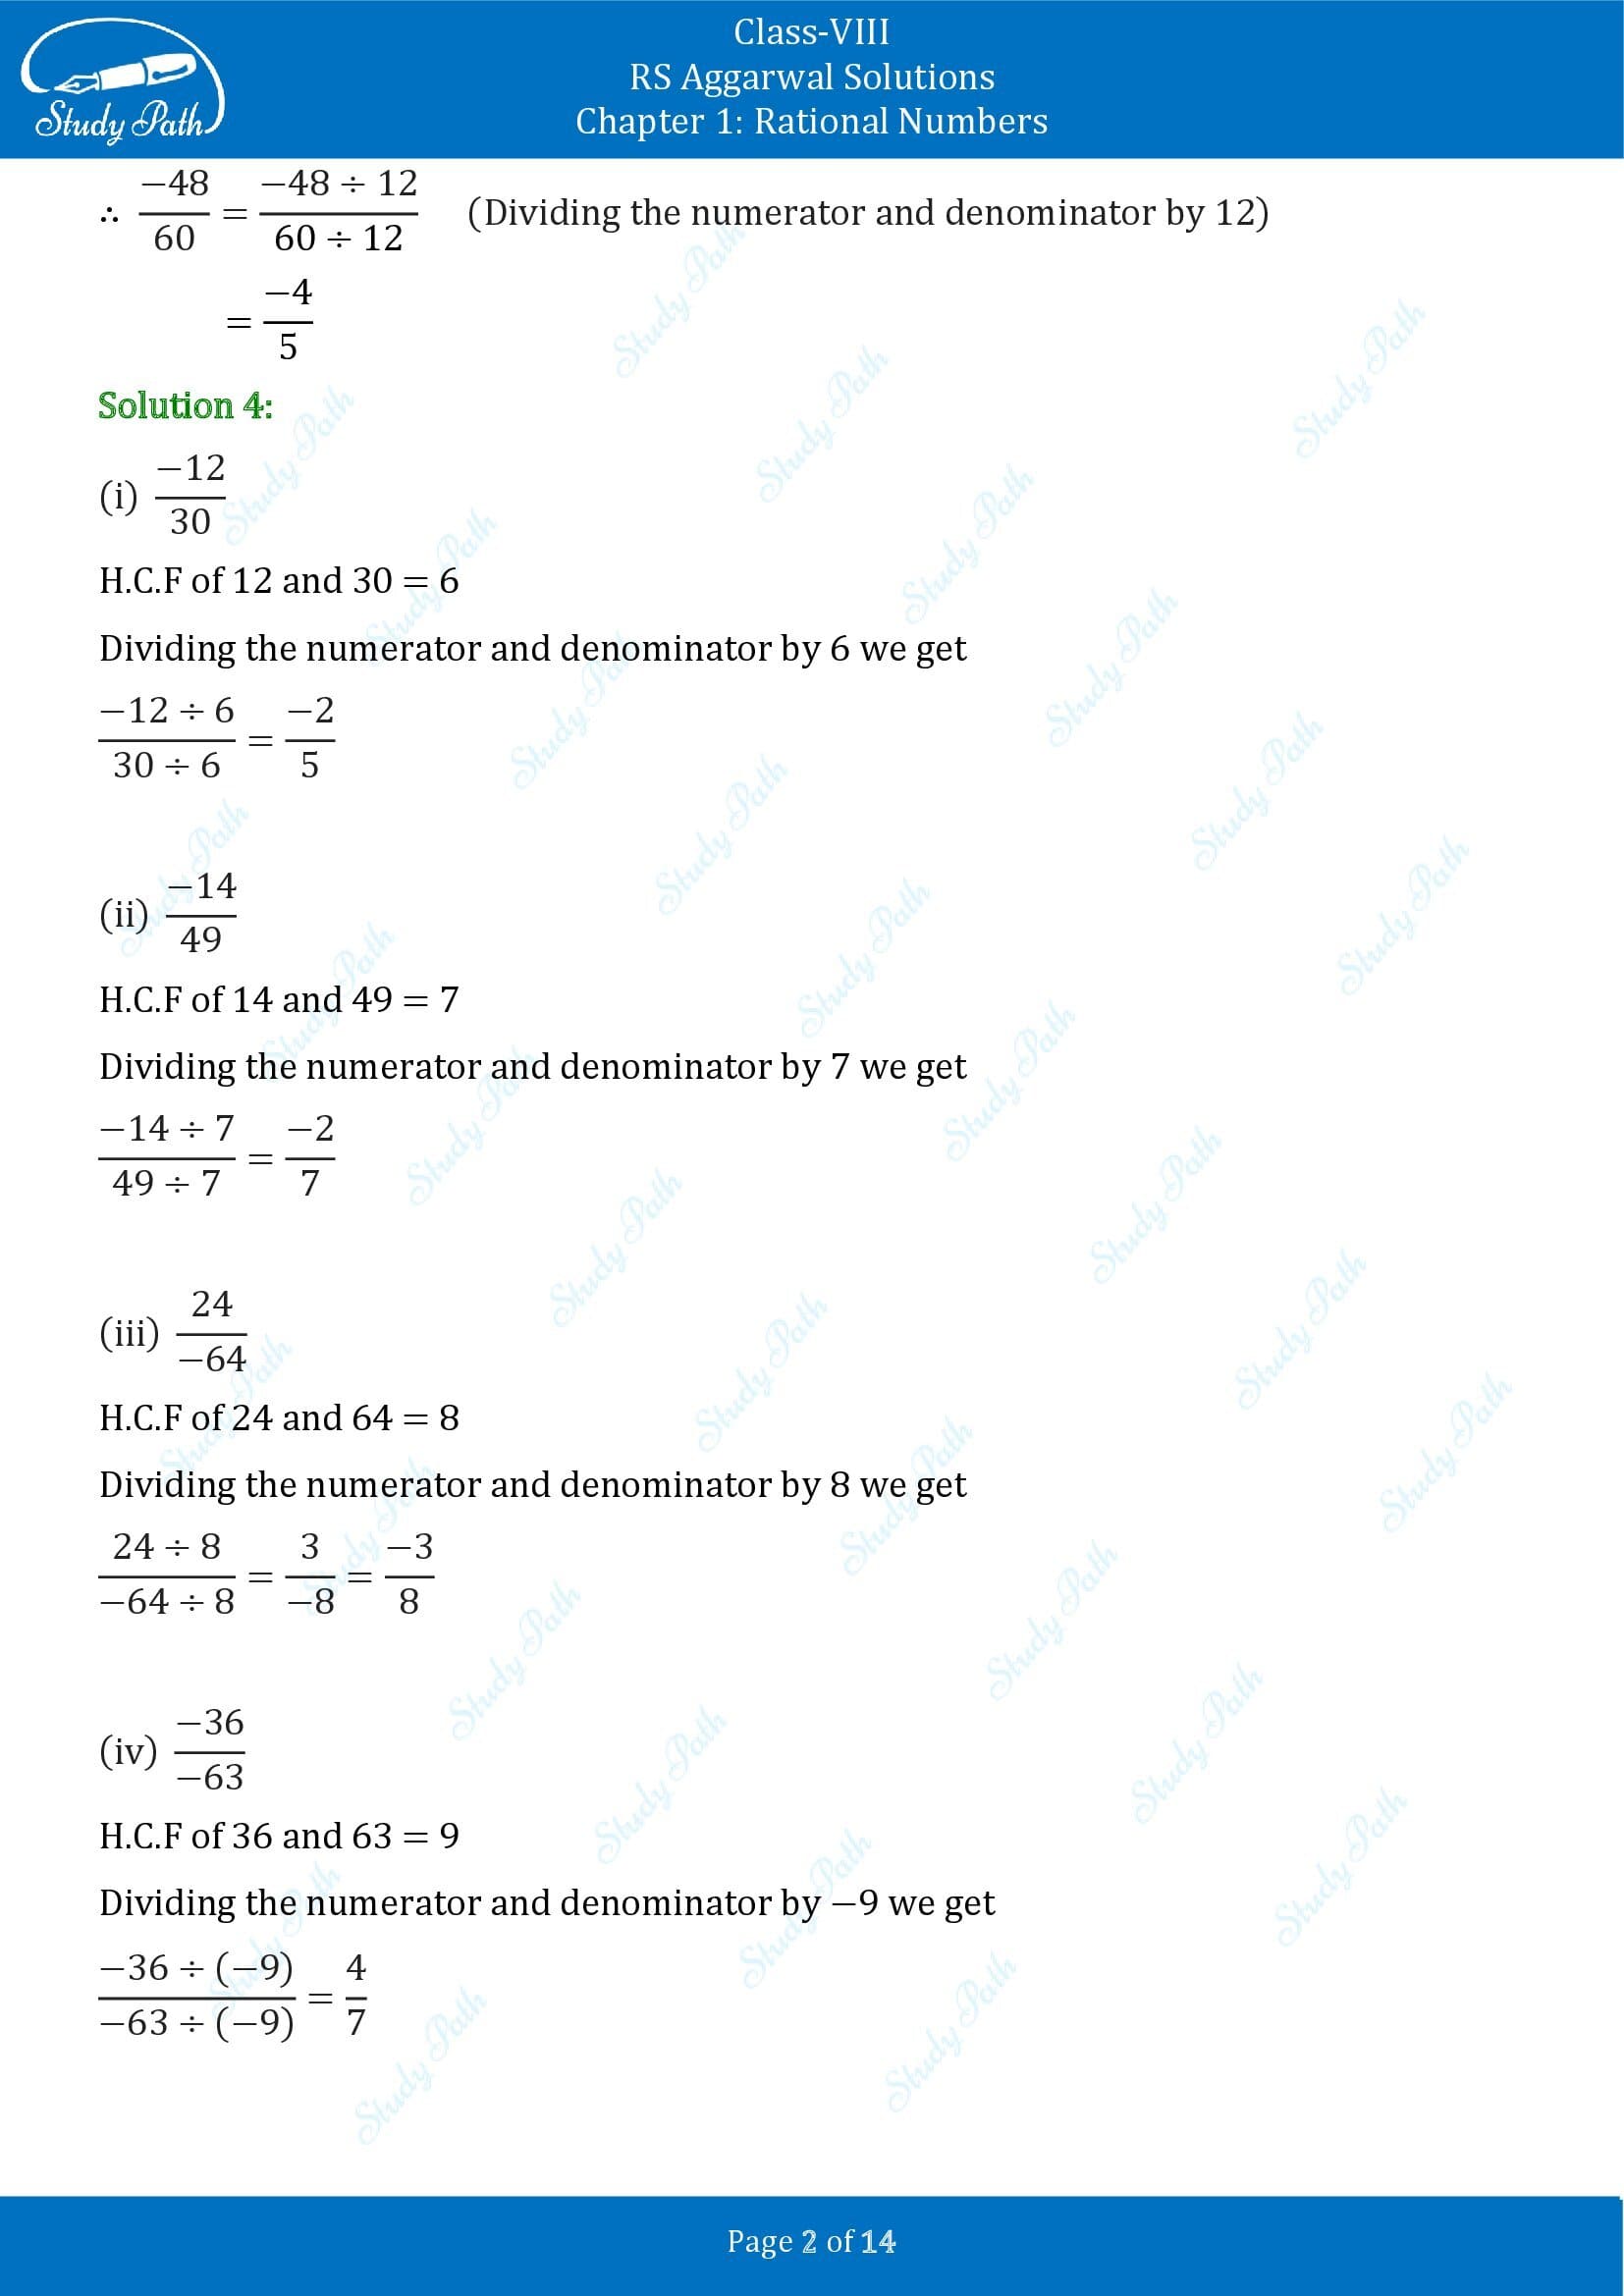 RS Aggarwal Solutions Class 8 Chapter 1 Rational Numbers Exercise 1A 00002